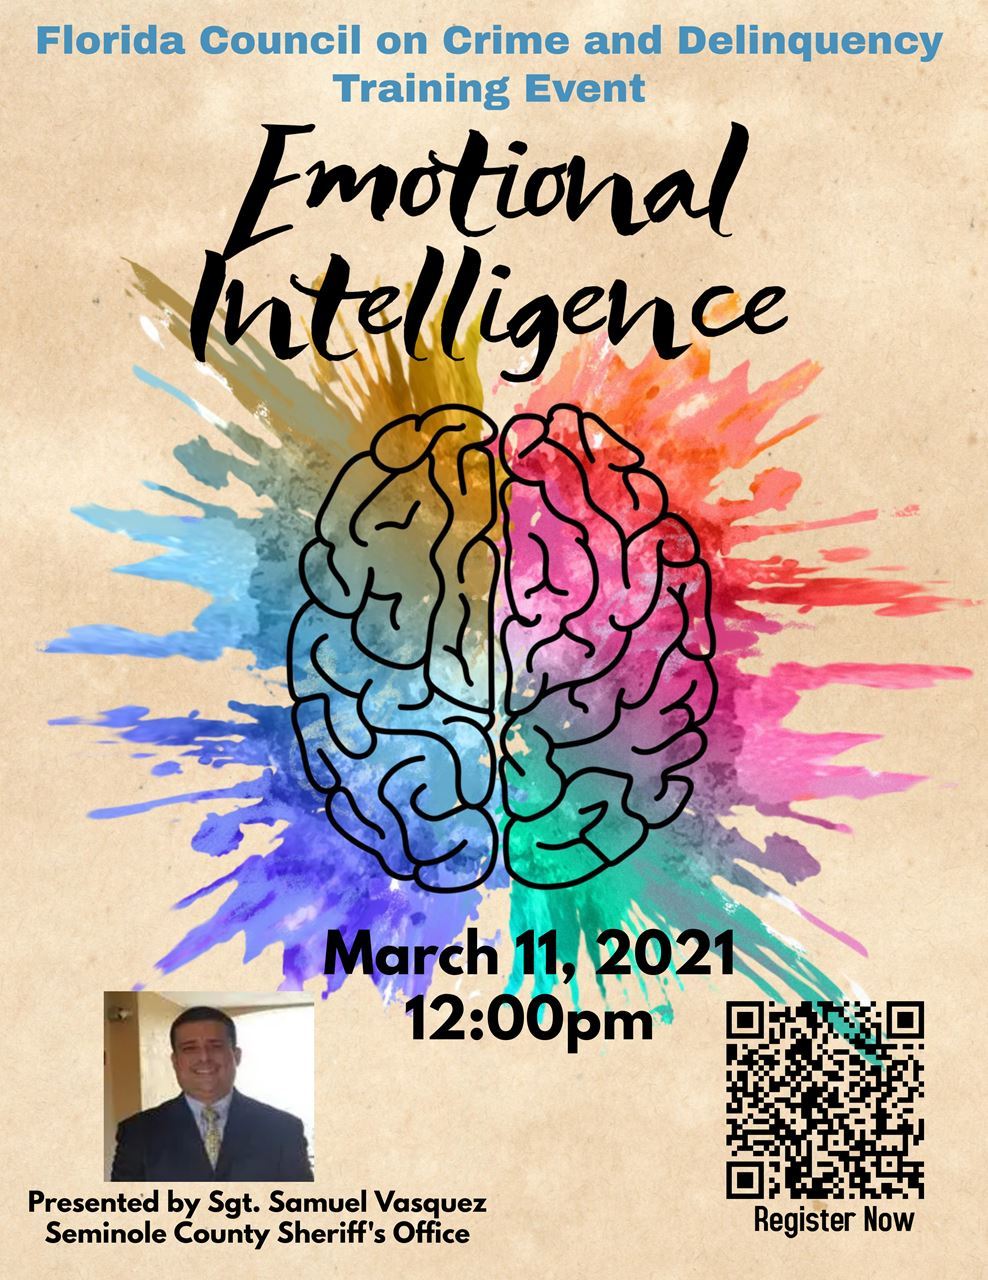 How To Train Your Team's Emotional Intelligence - Four Lenses in Long Beach California thumbnail